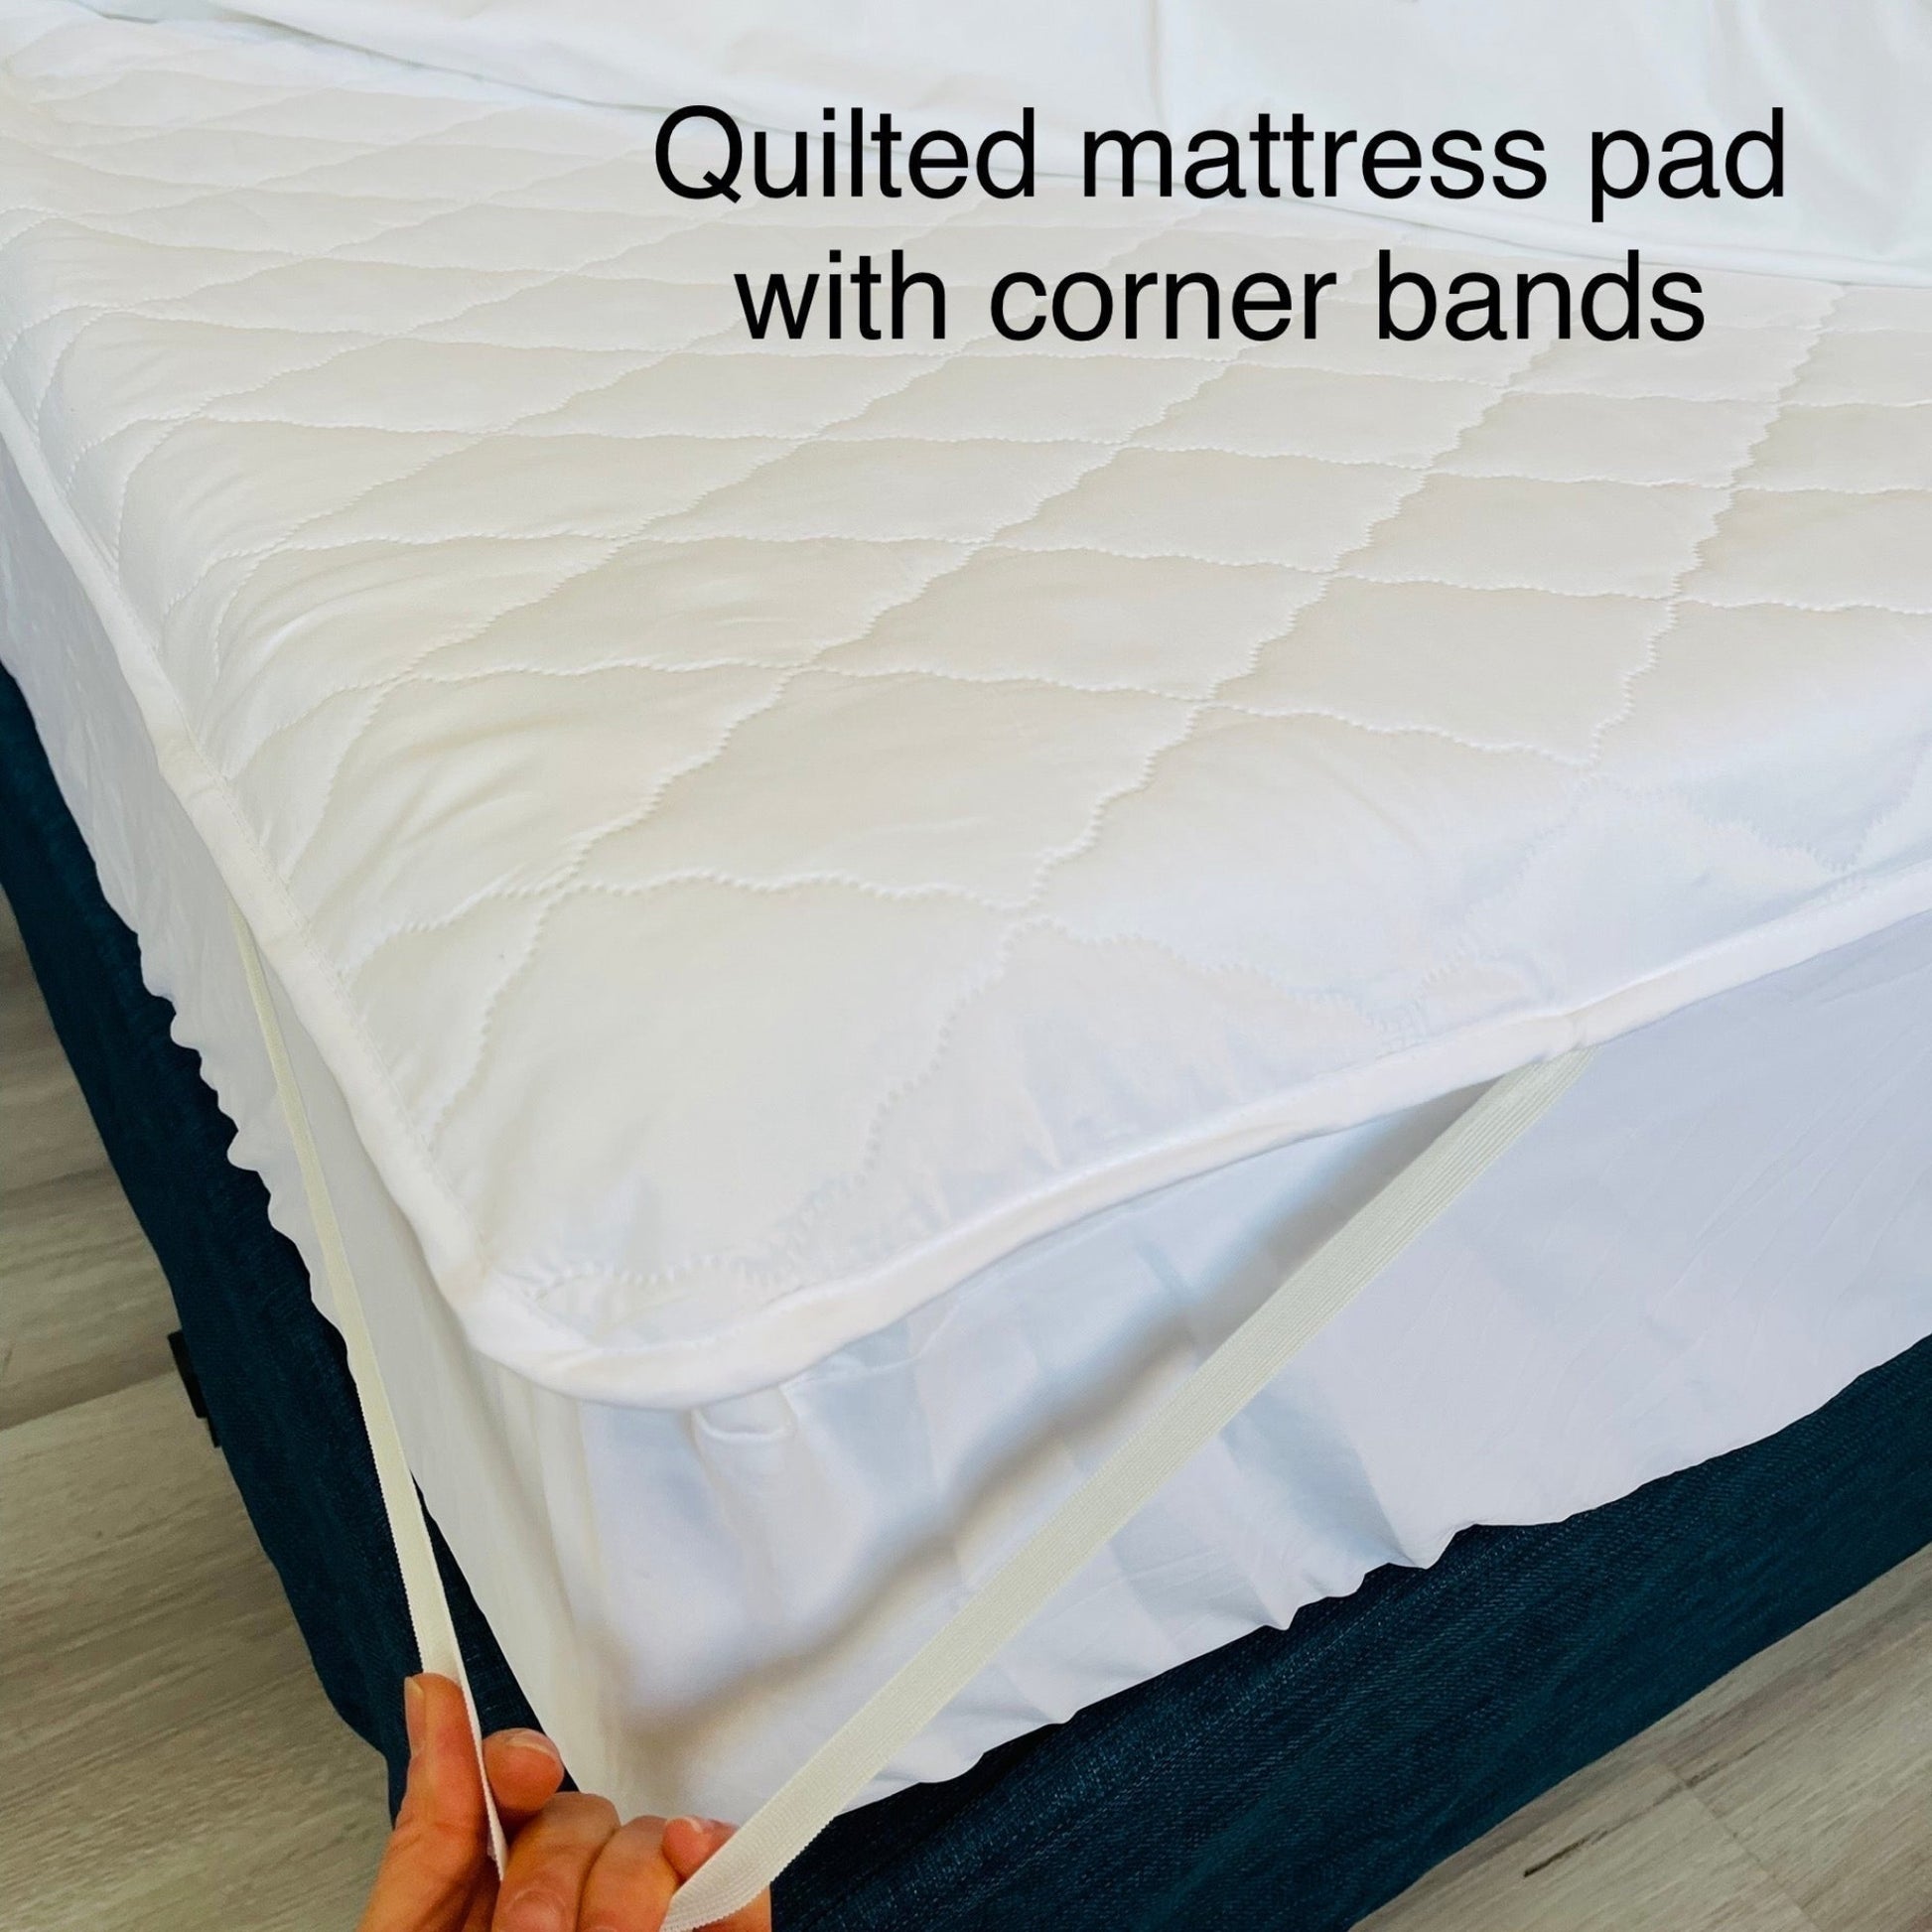 Ultrasonic Quilted Mattress Pad (with Anchor Bands)